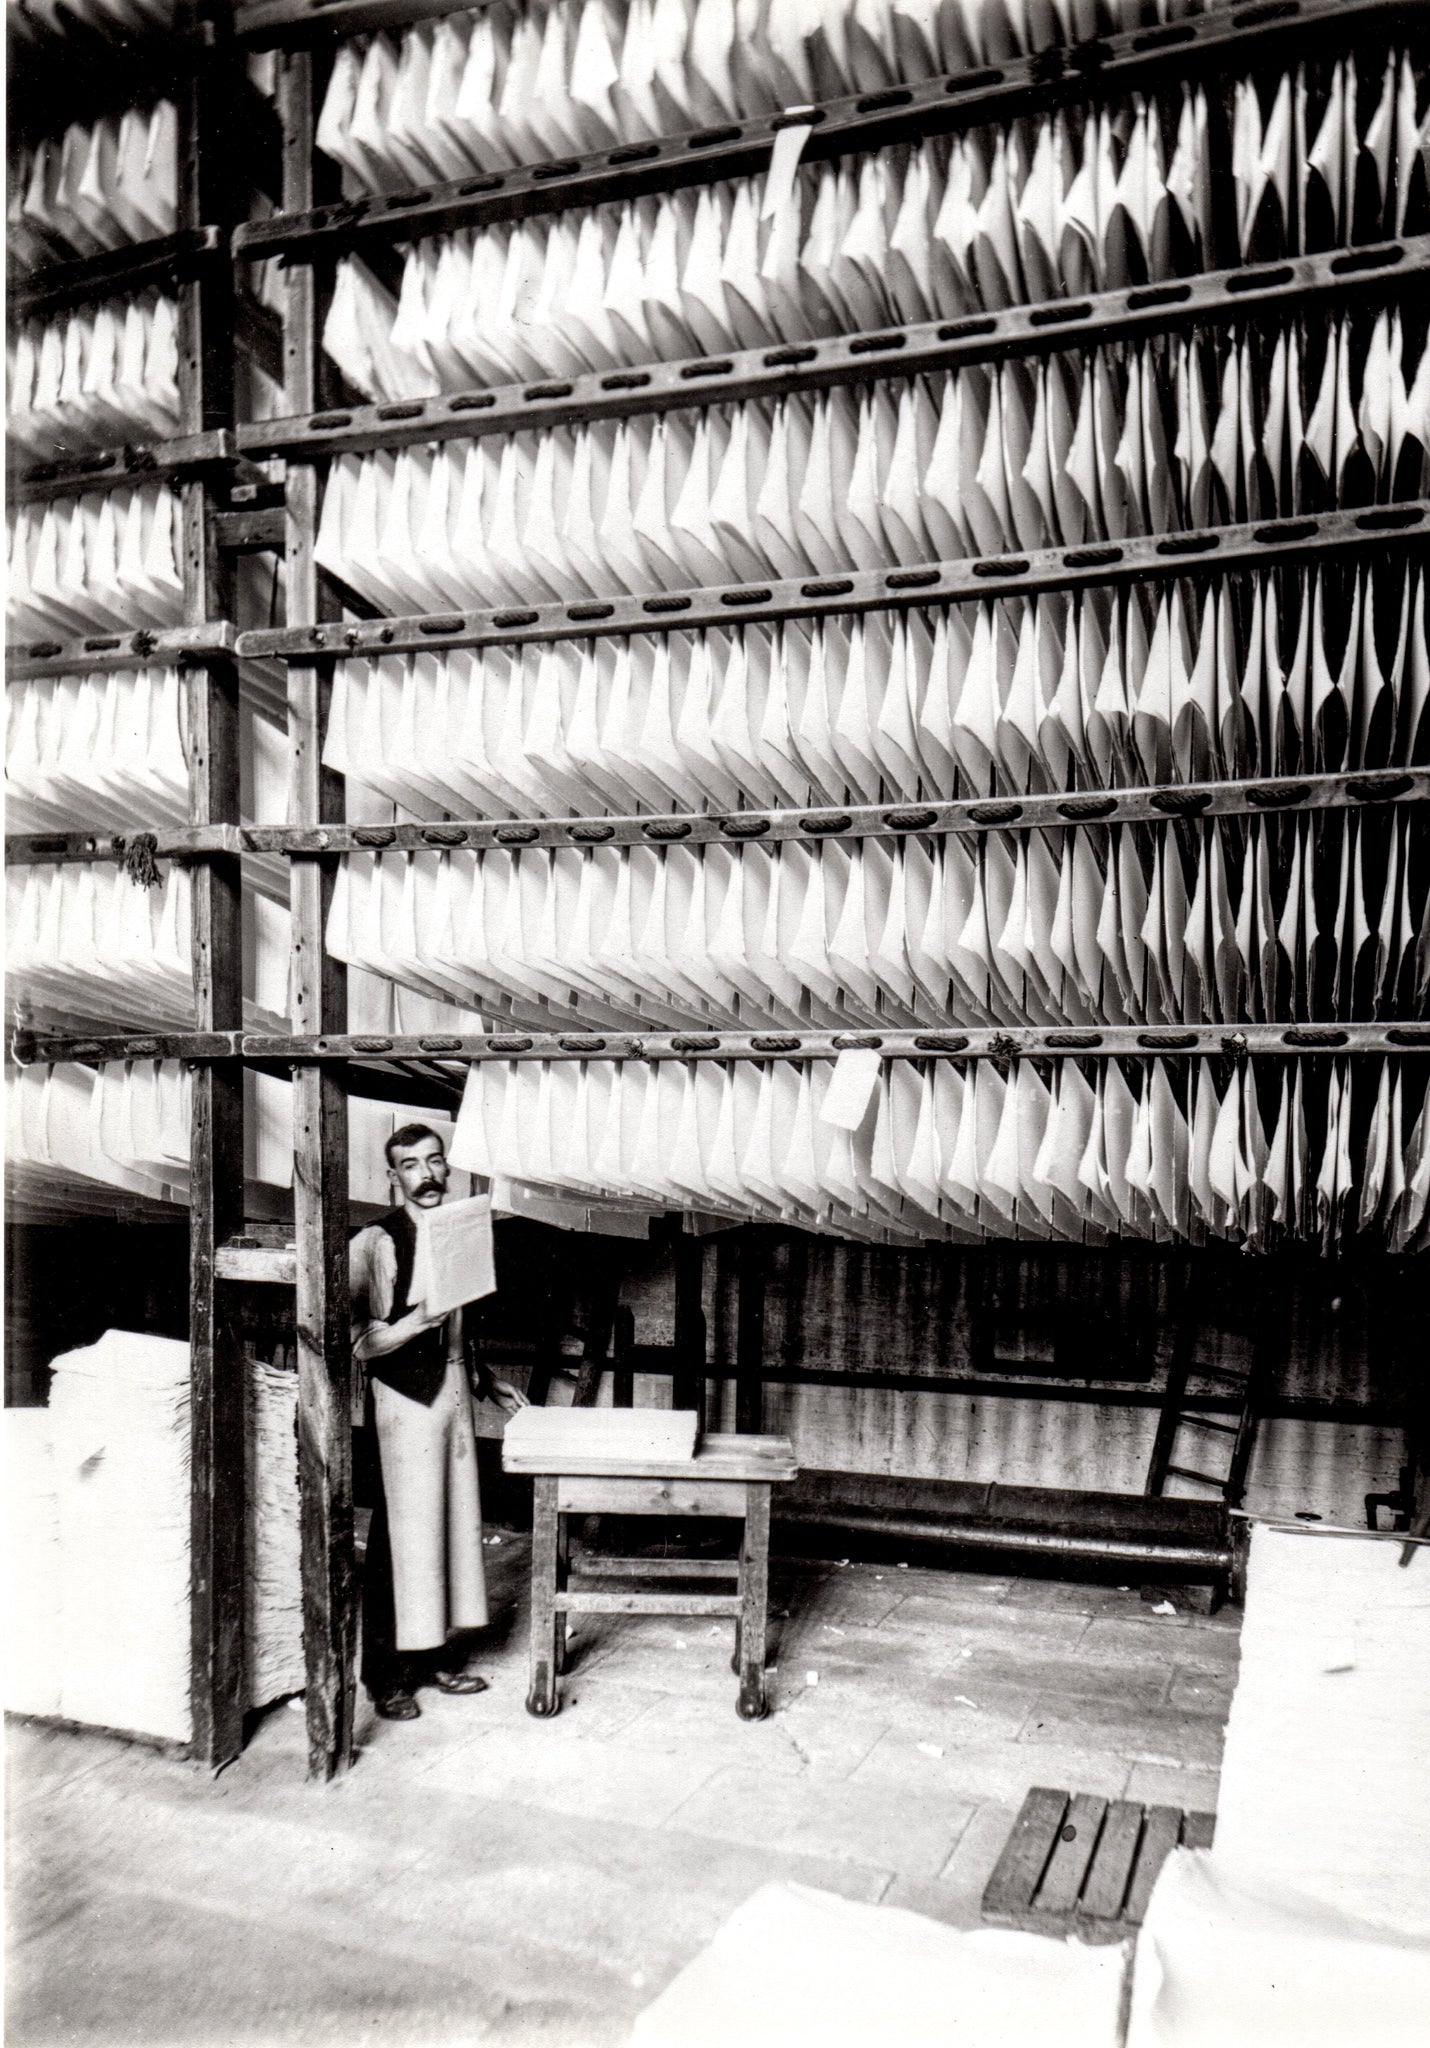 Drying Paper at Whatman's Sprinfield Mill